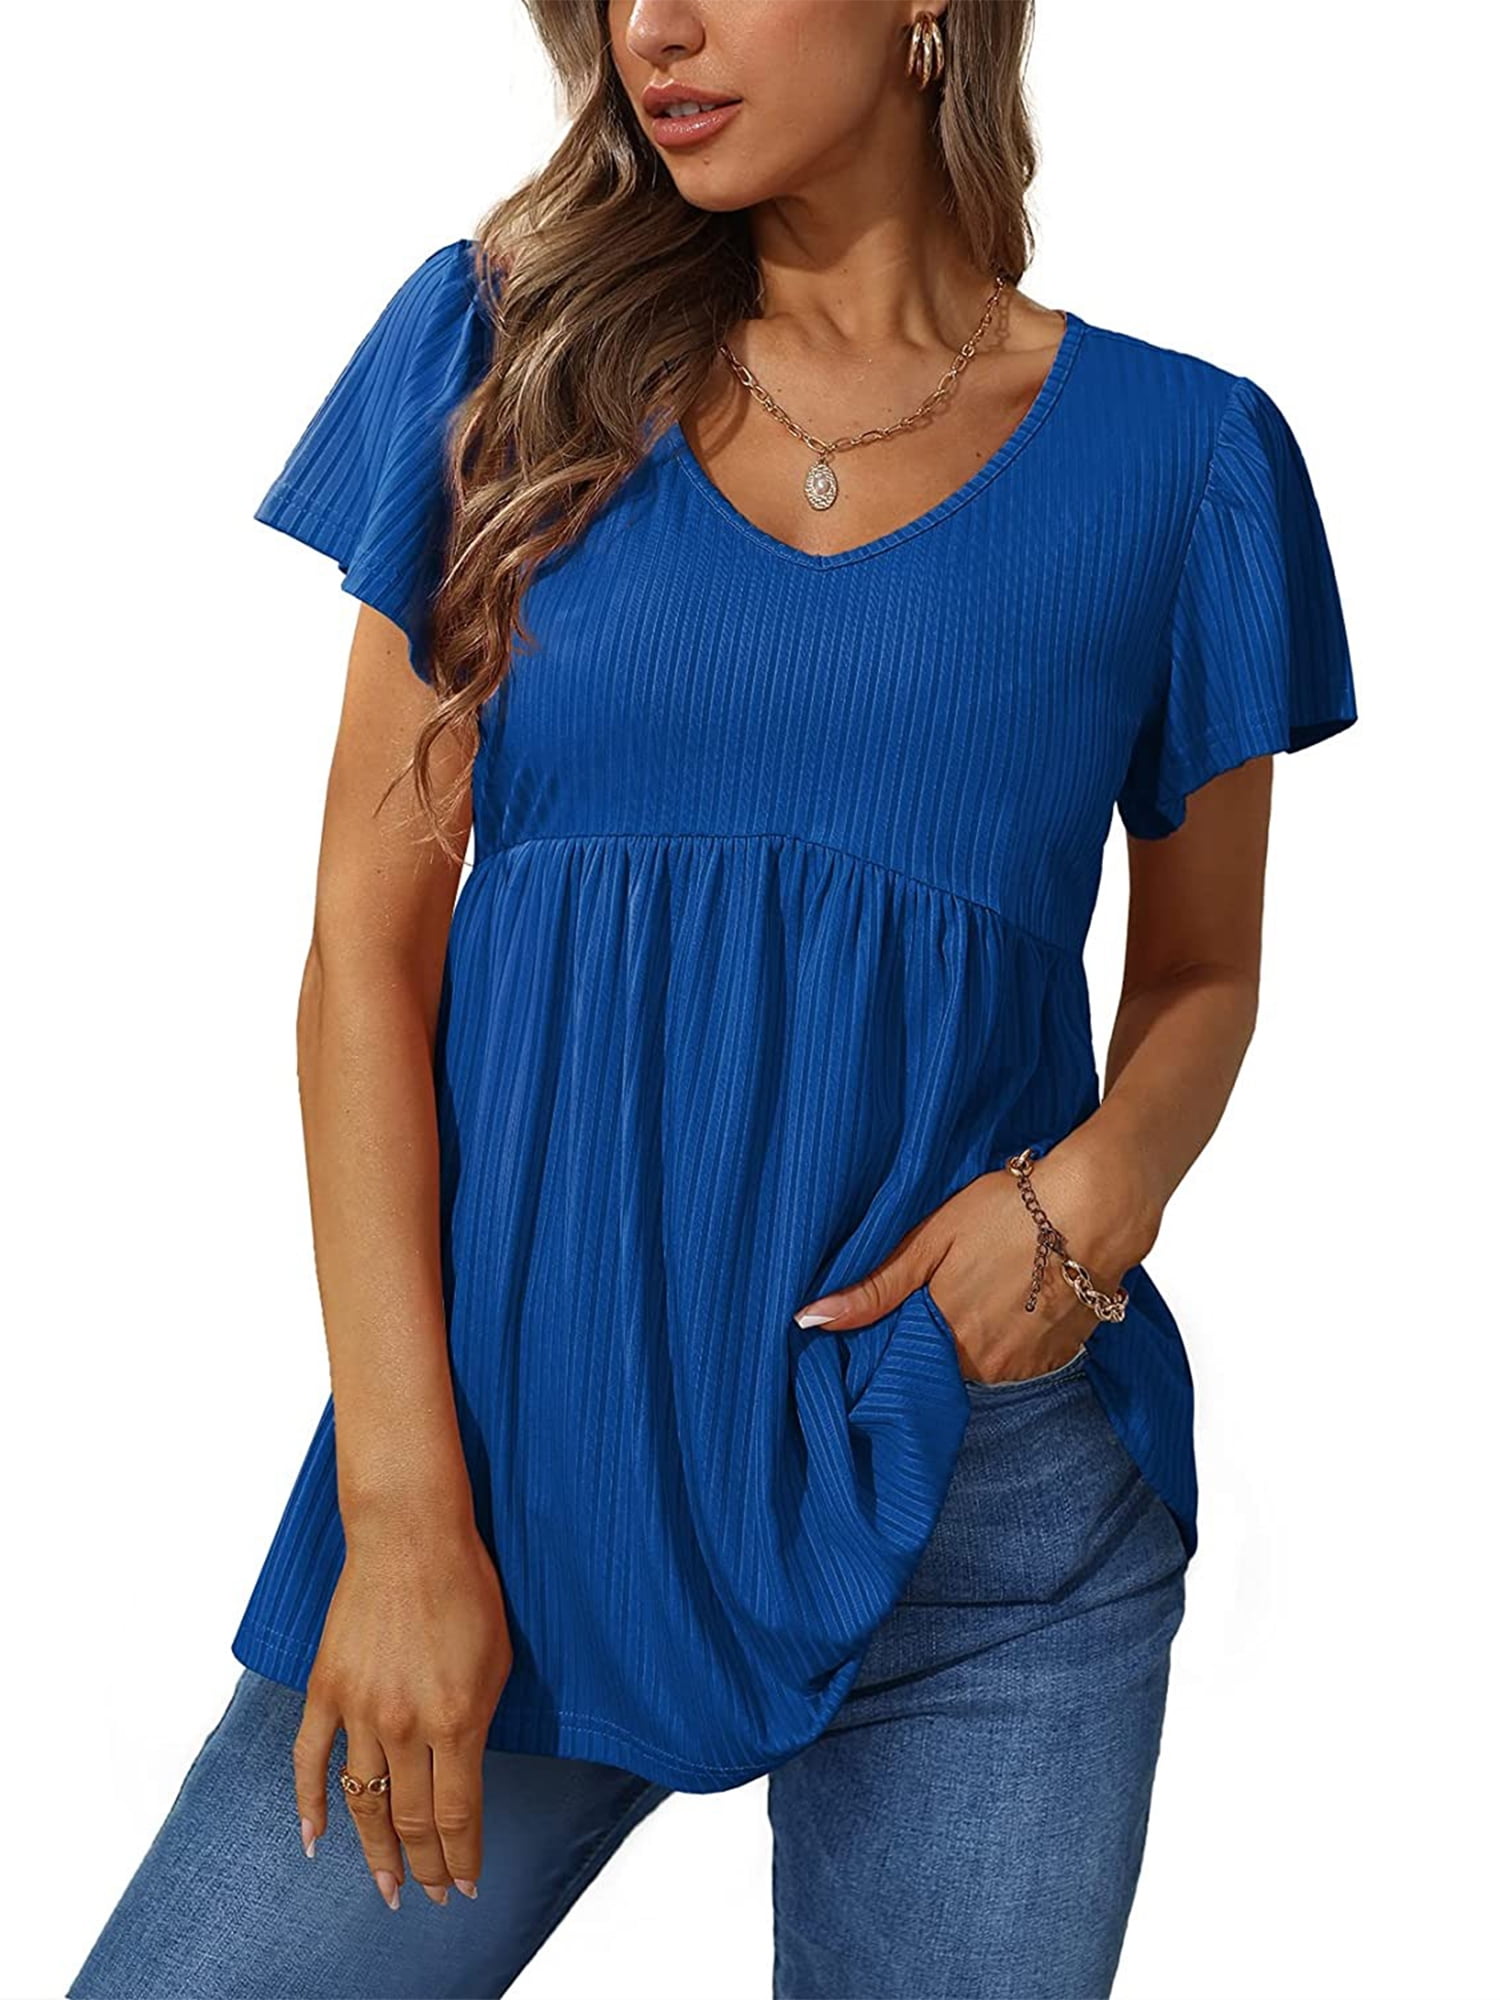 Glonme Women V Neck Comfy Blouse Casual Holiday Tee Short Sleeve Beach T  Shirt Tunic 